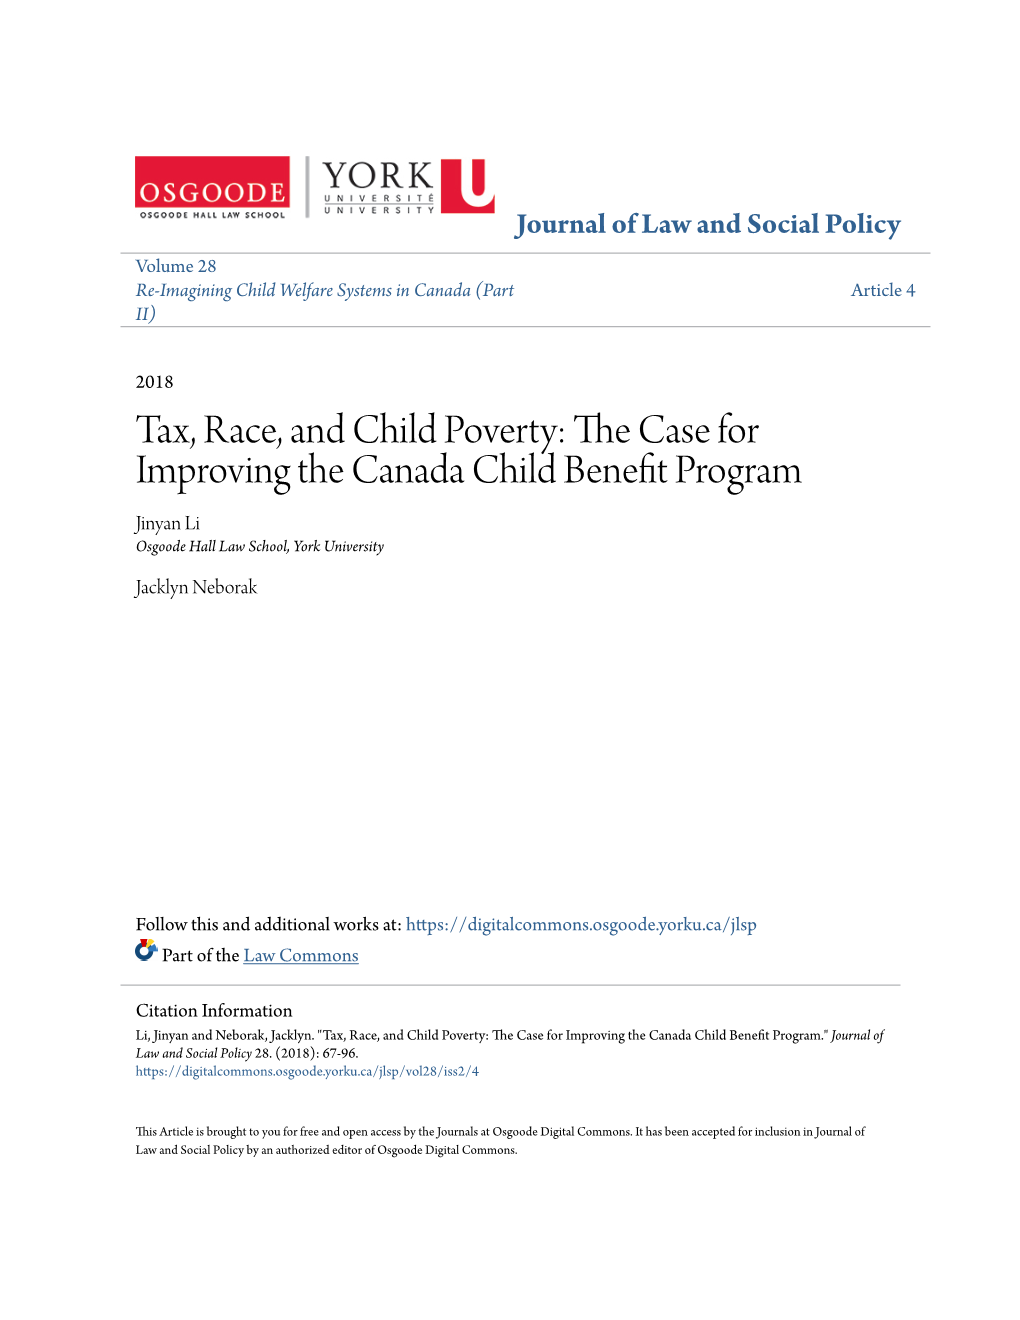 Tax, Race, and Child Poverty: the Case for Improving the Canada C